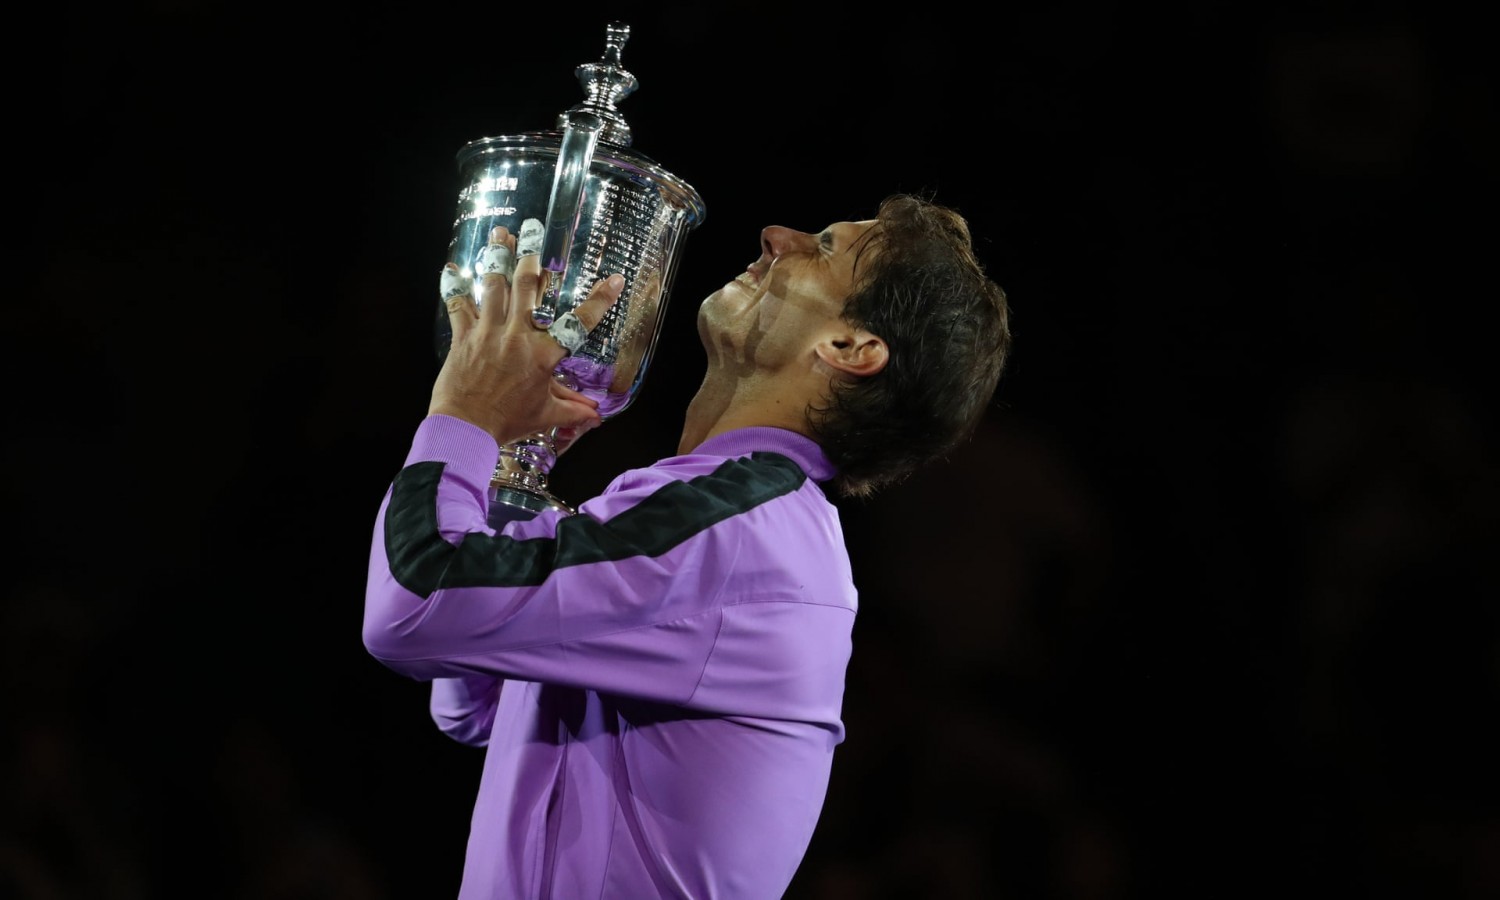 Rafael Nadal lifts the US Open trophy after a rollercoaster win over Daniil Medvedev. Photograph: Al Bello/Getty Images